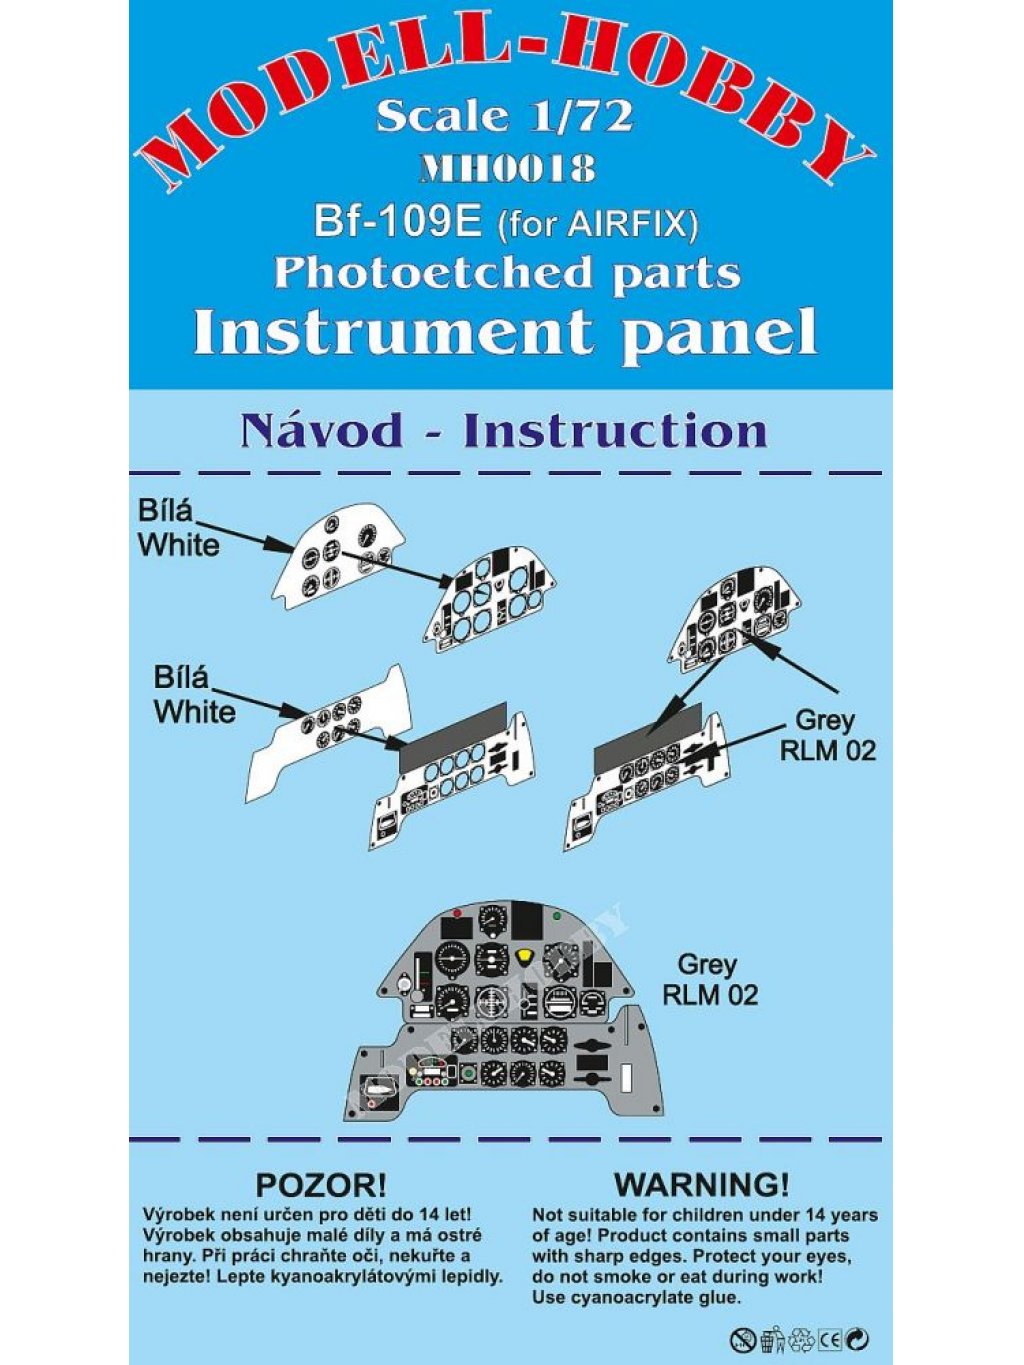 Messerschmitt Bf-109E Photoetched parts instrument panel for Airfix ex Modell-Hobby